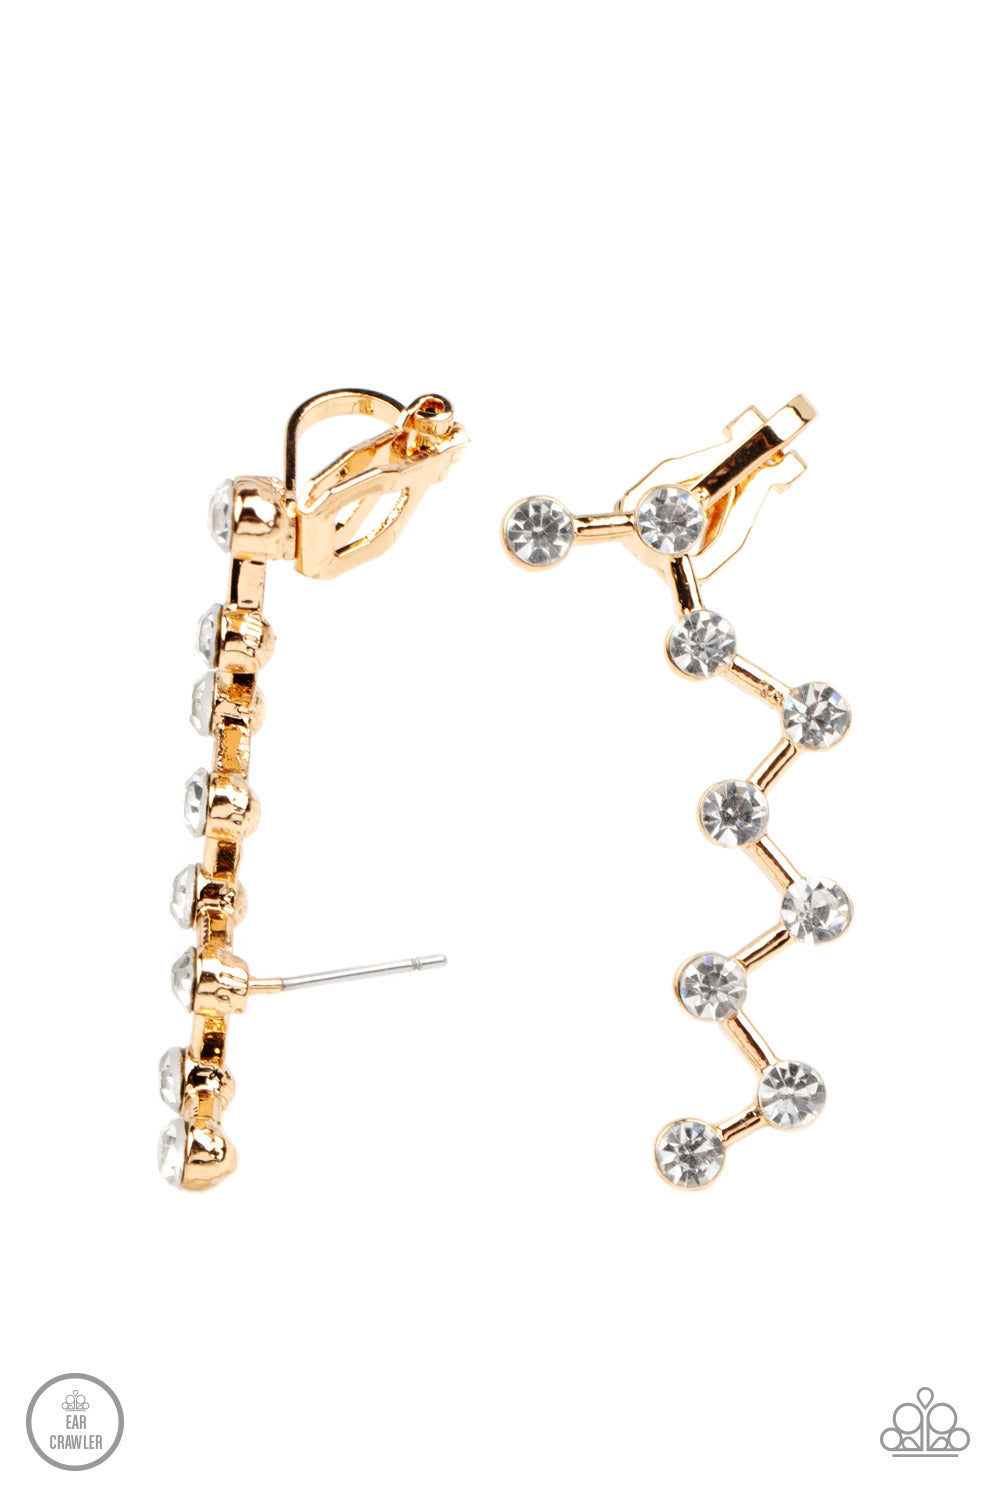 Clamoring Constellations Paparazzi Accessories Earring Crawlers Gold